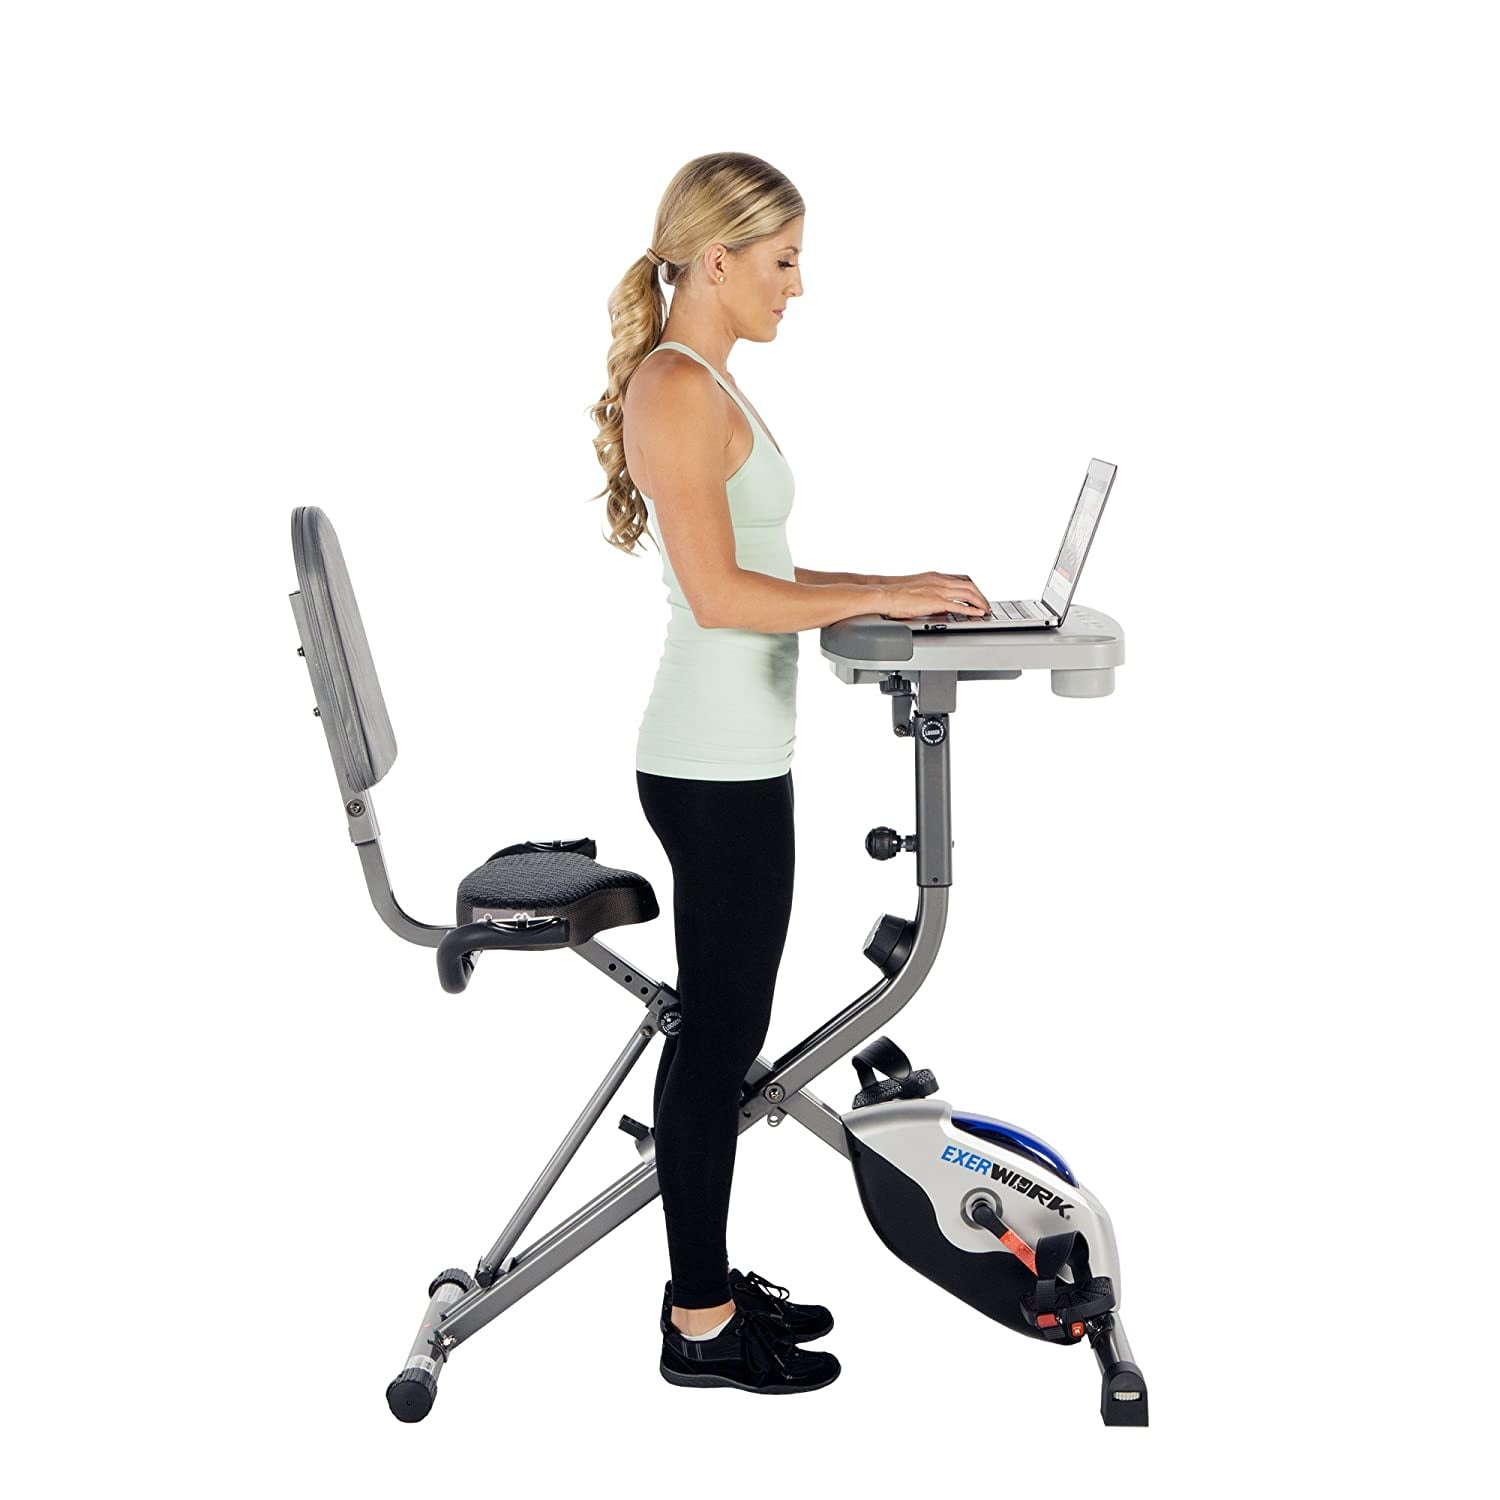 Exerpeutic WORKFIT 1000 Fully Adjustable Desk Folding Exercise Bike with Pulse 